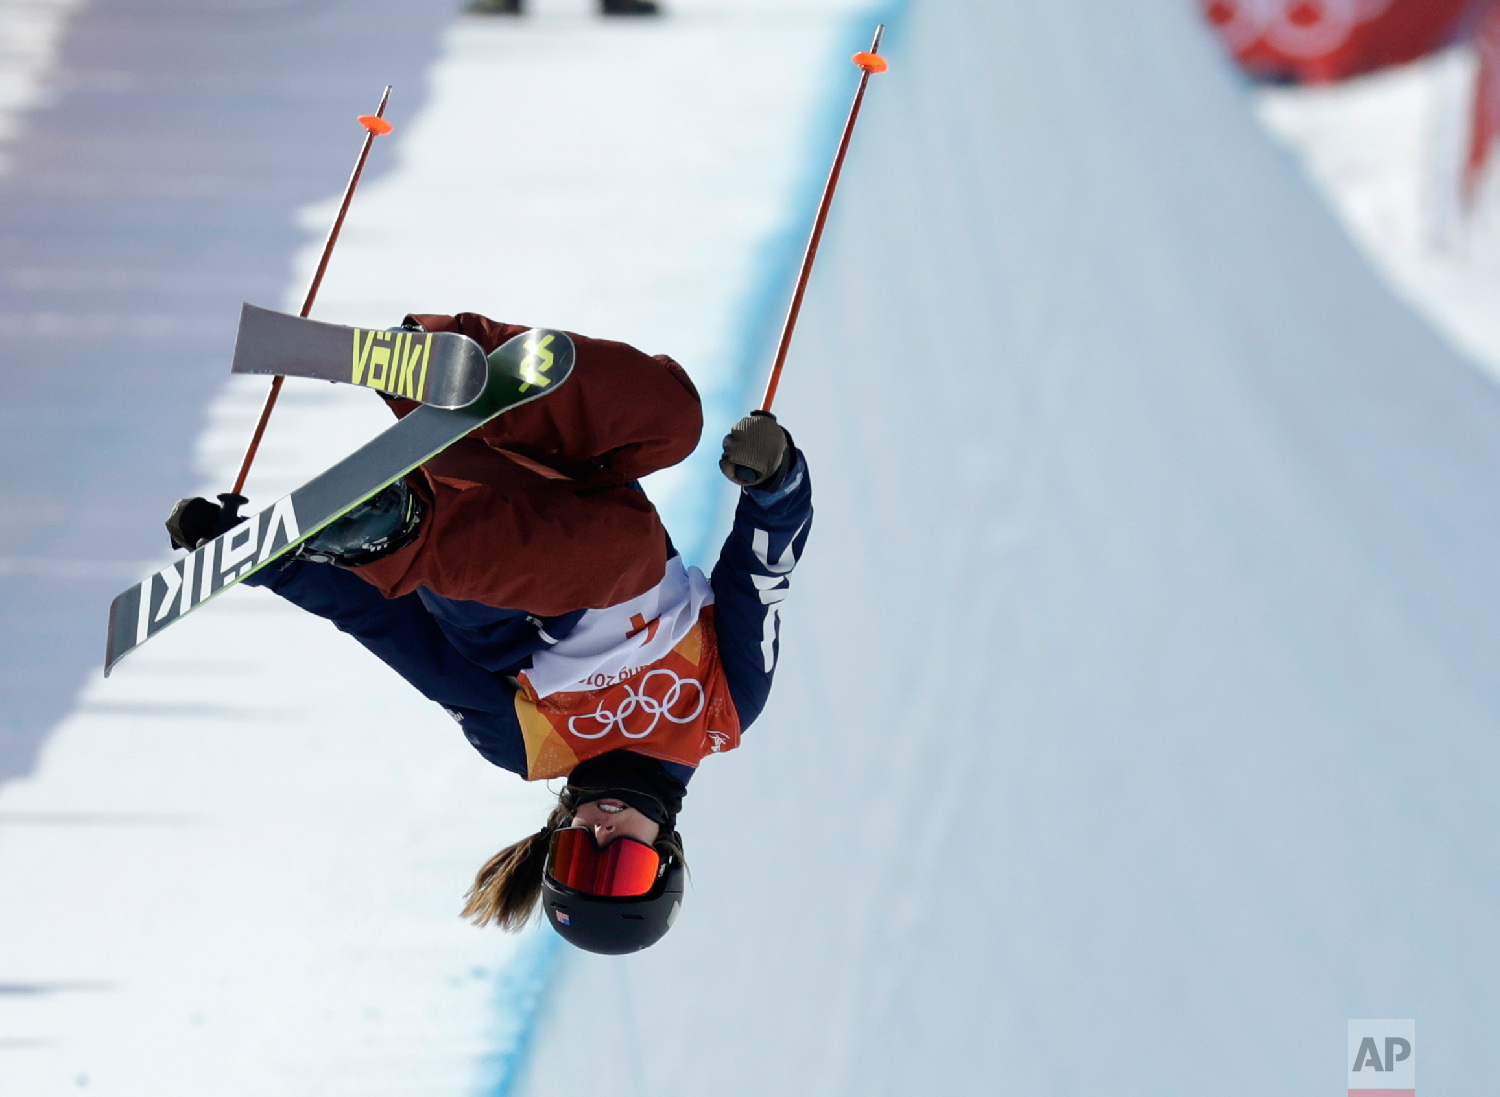  Maddie Bowman, of the United States, jumps during the women's halfpipe final at Phoenix Snow Park at the 2018 Winter Olympics in Pyeongchang, South Korea, Tuesday, Feb. 20, 2018. (AP Photo/Kin Cheung) 